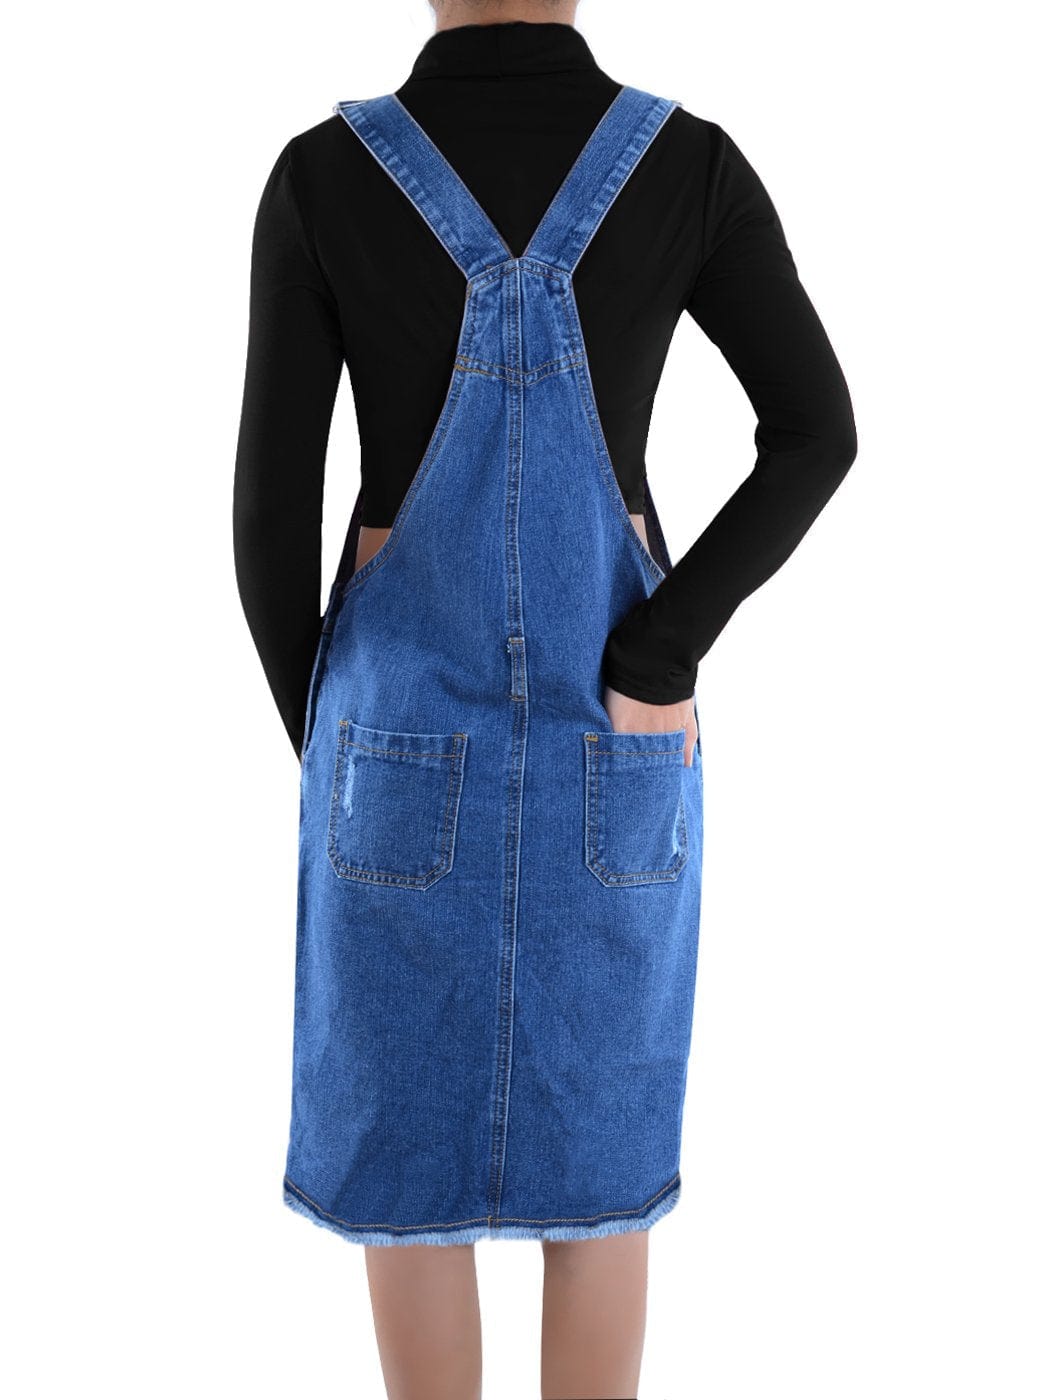 Buy Handmade Womens Denim Chambray Apron Midi Dress Dungarees Pinafore  Available in Sizes Uk4-26 Online in India - Etsy